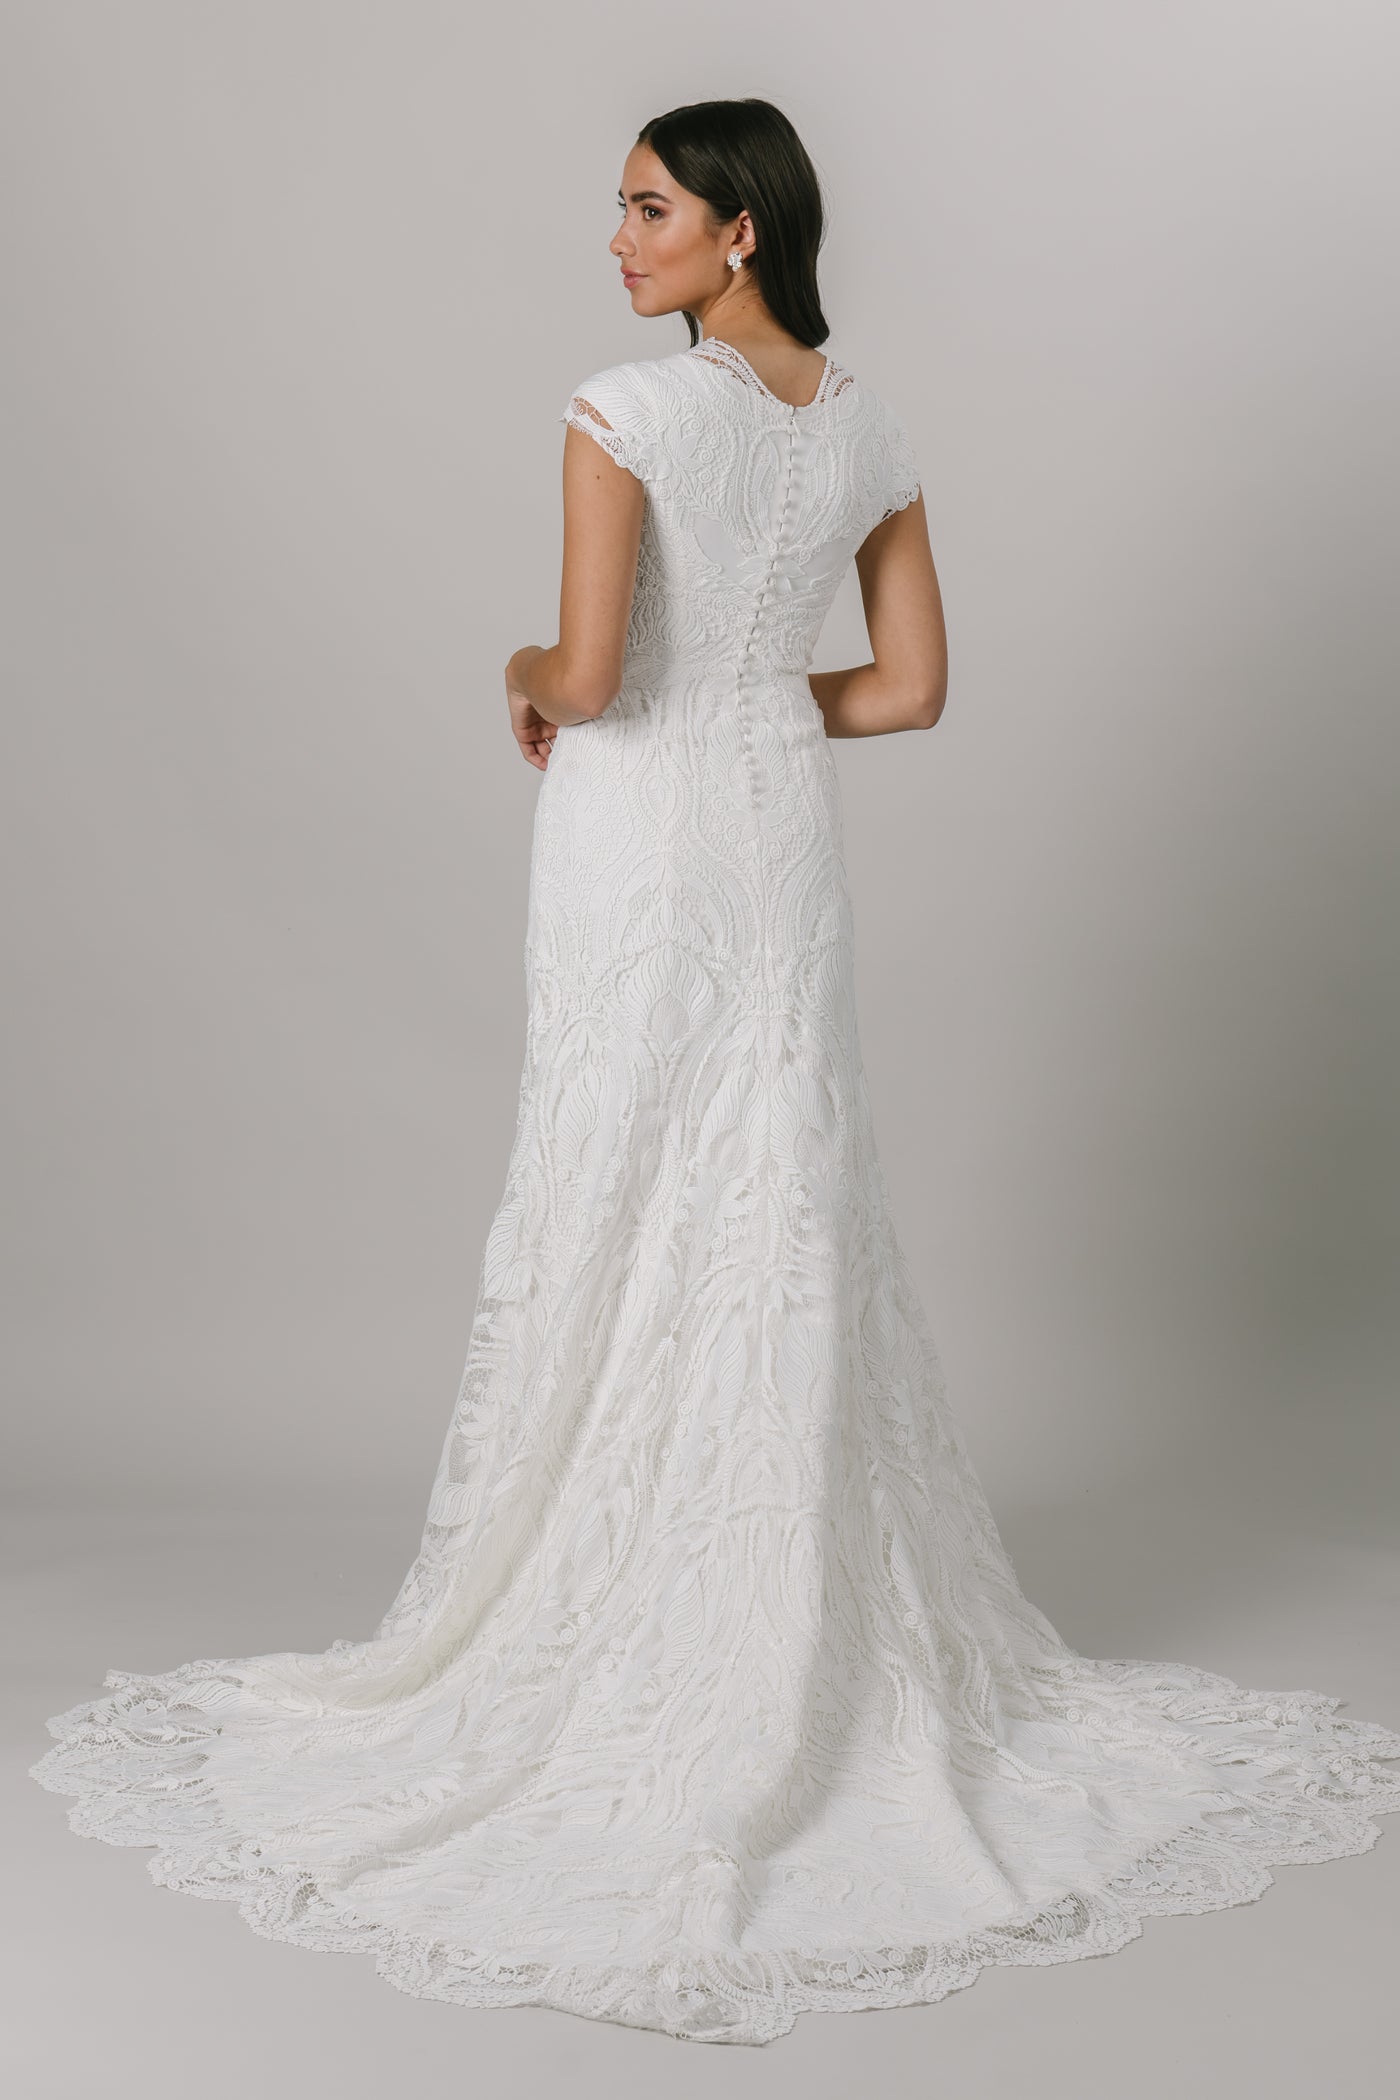 This brand new, modest wedding dress features a flattering fit-and-fall silhouette, a thick lace pattern and an adorable illusion neckline. Available in Ivory/Ivory and Ivory/Cappuccino.  Pictured in Ivory/Ivory. From LatterDayBride in downtown Salt Lake City.